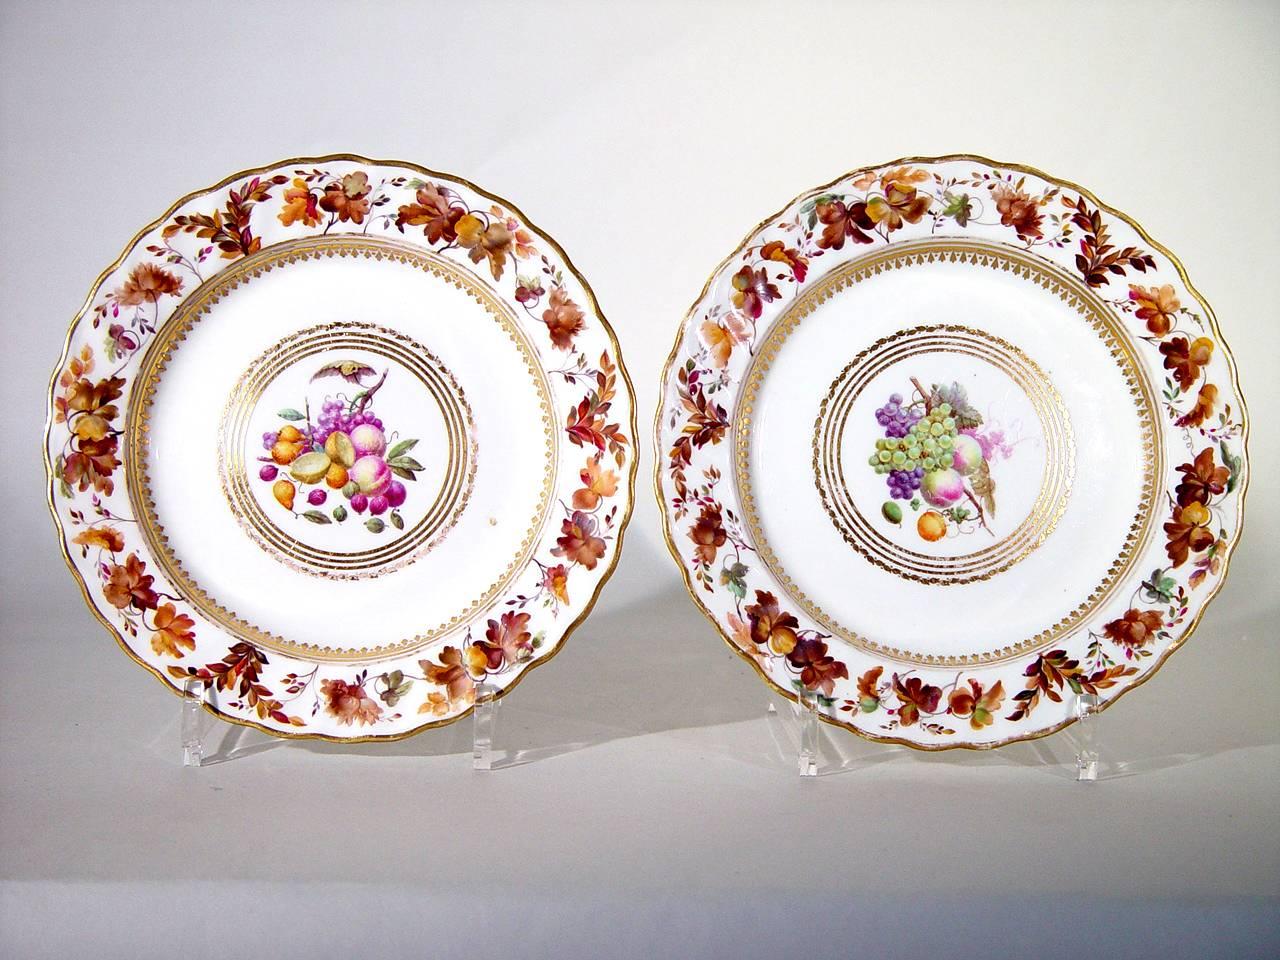 The beautiful and stylish Derby porcelain set of six plates are painted by William Longden with fruit within a heart-shaped gilt border. The fruit depicted include grapes, plums, strawberries, raspberries, and apples amongst others. The rim in